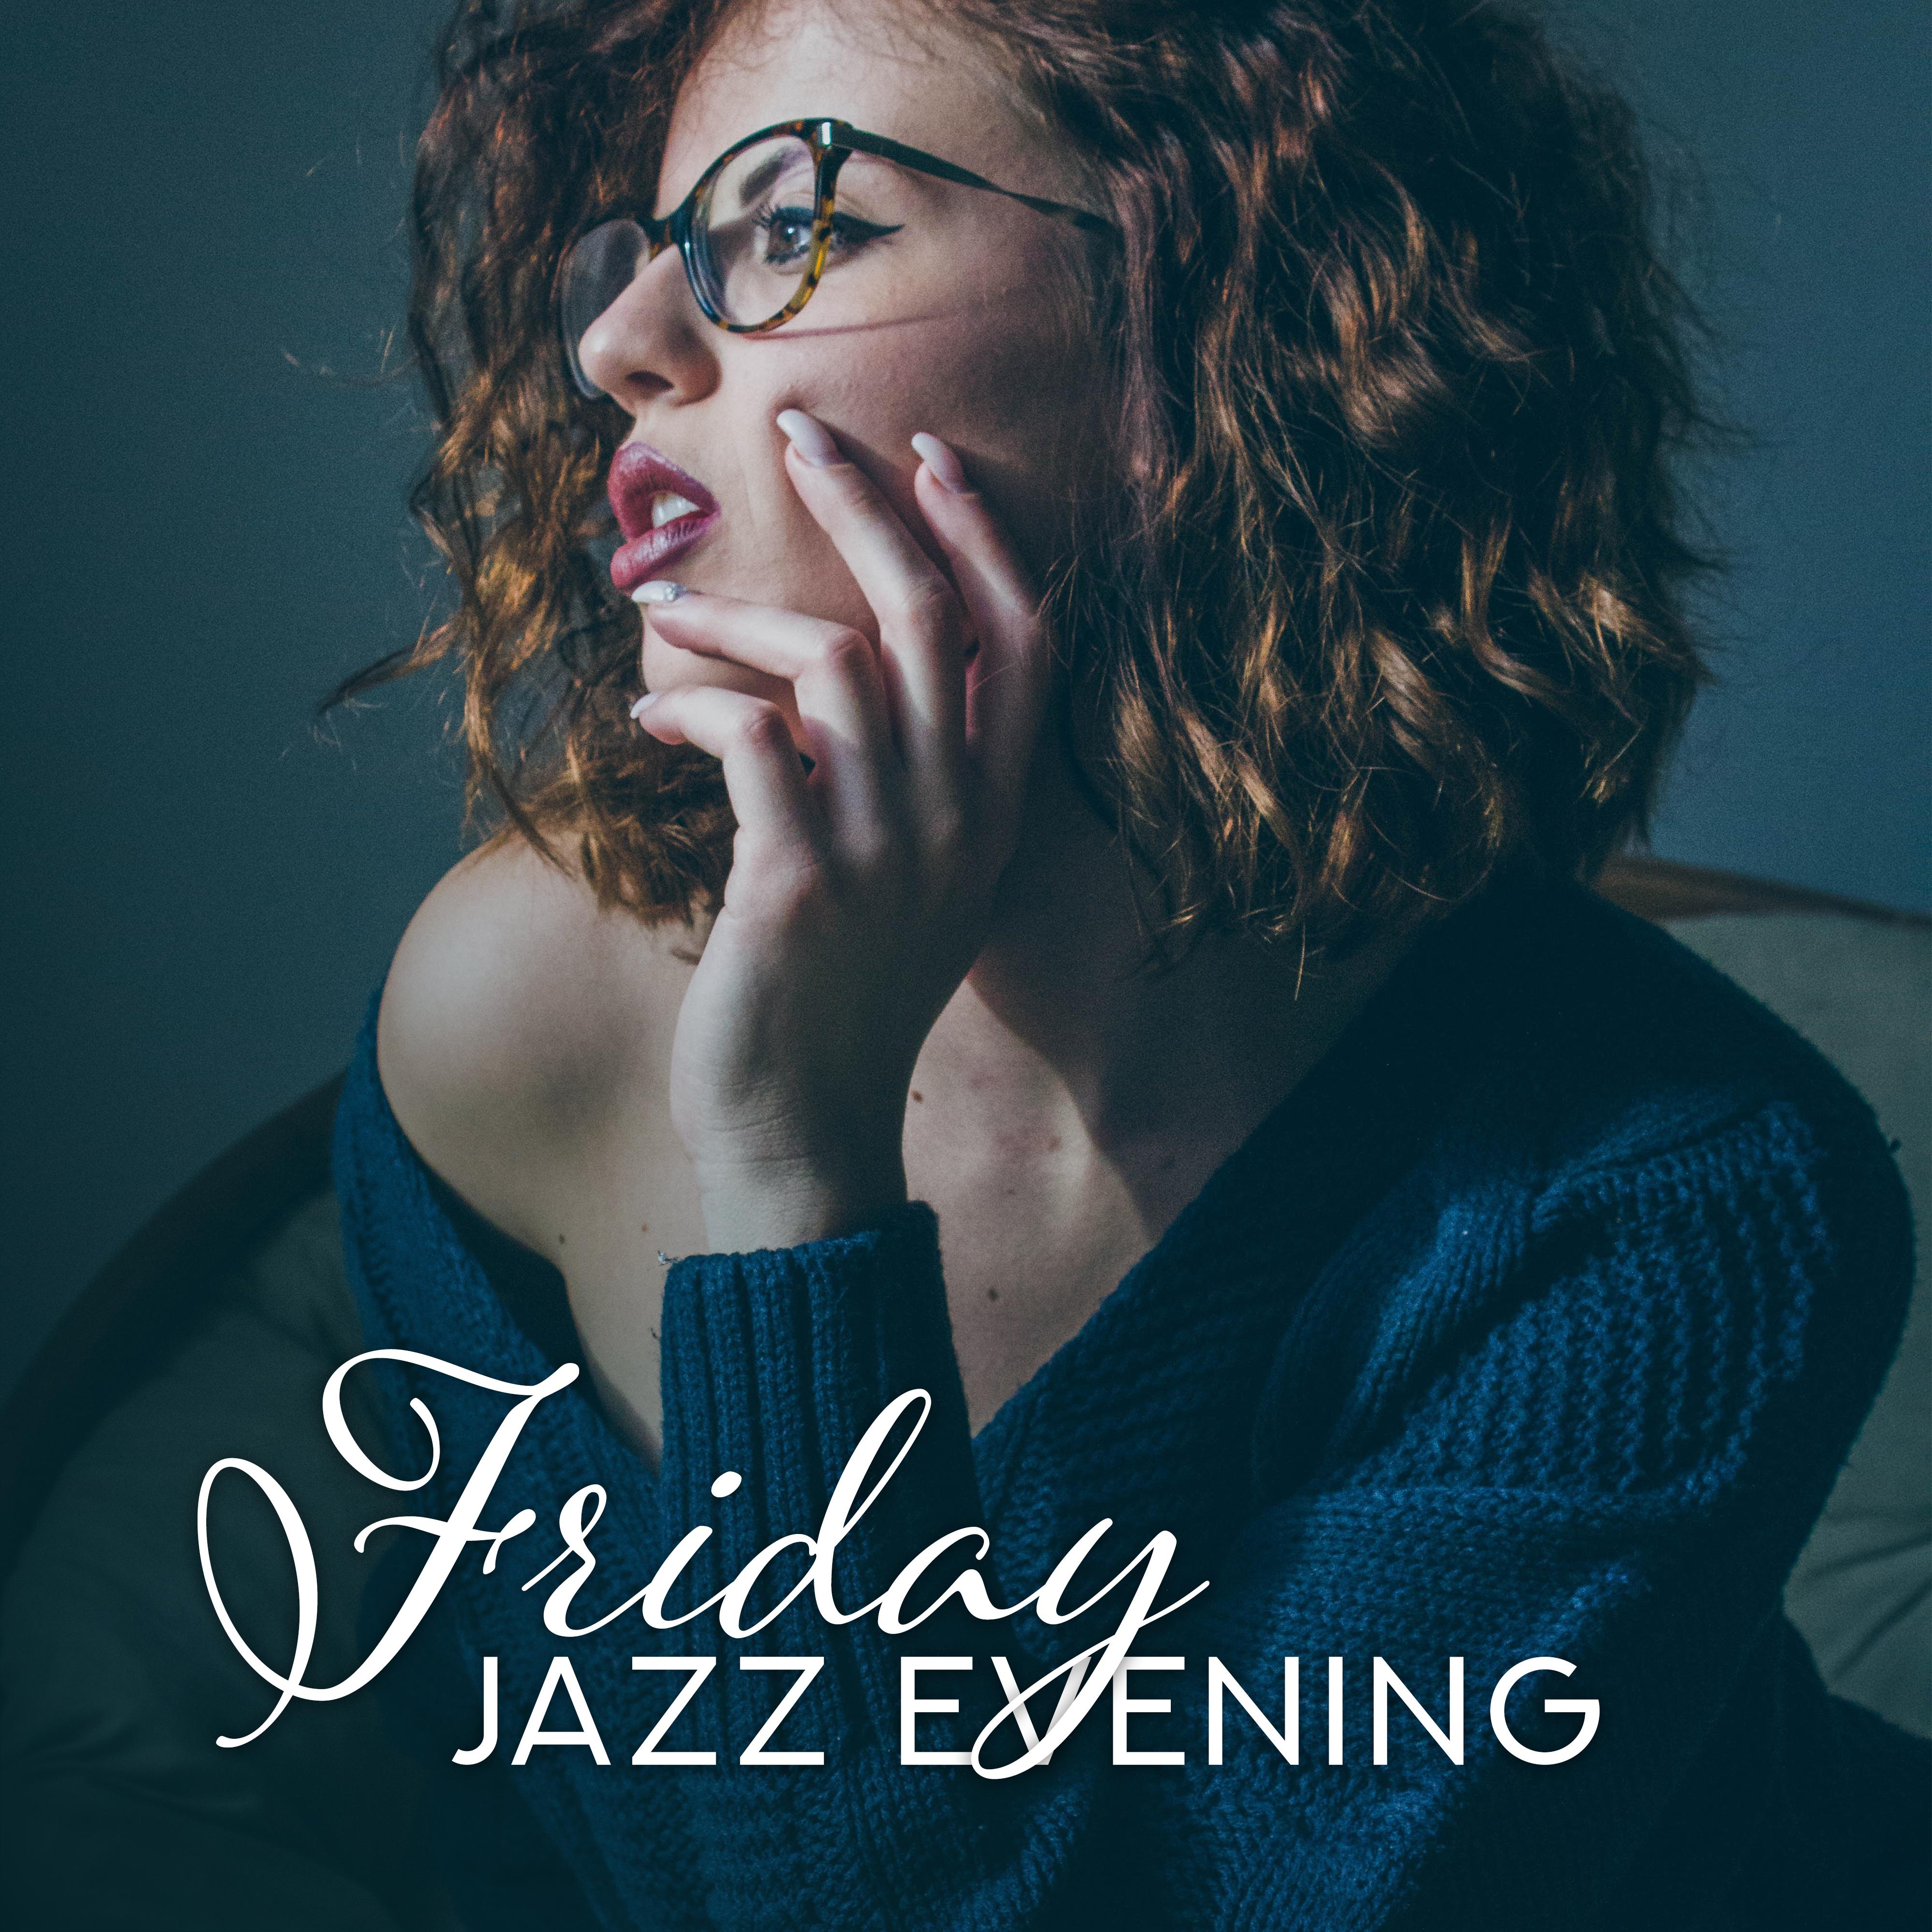 Friday Jazz Evening: Best Instrumental Songs after a Week of Work and a Struggle for Well-deserved Rest and Relaxation